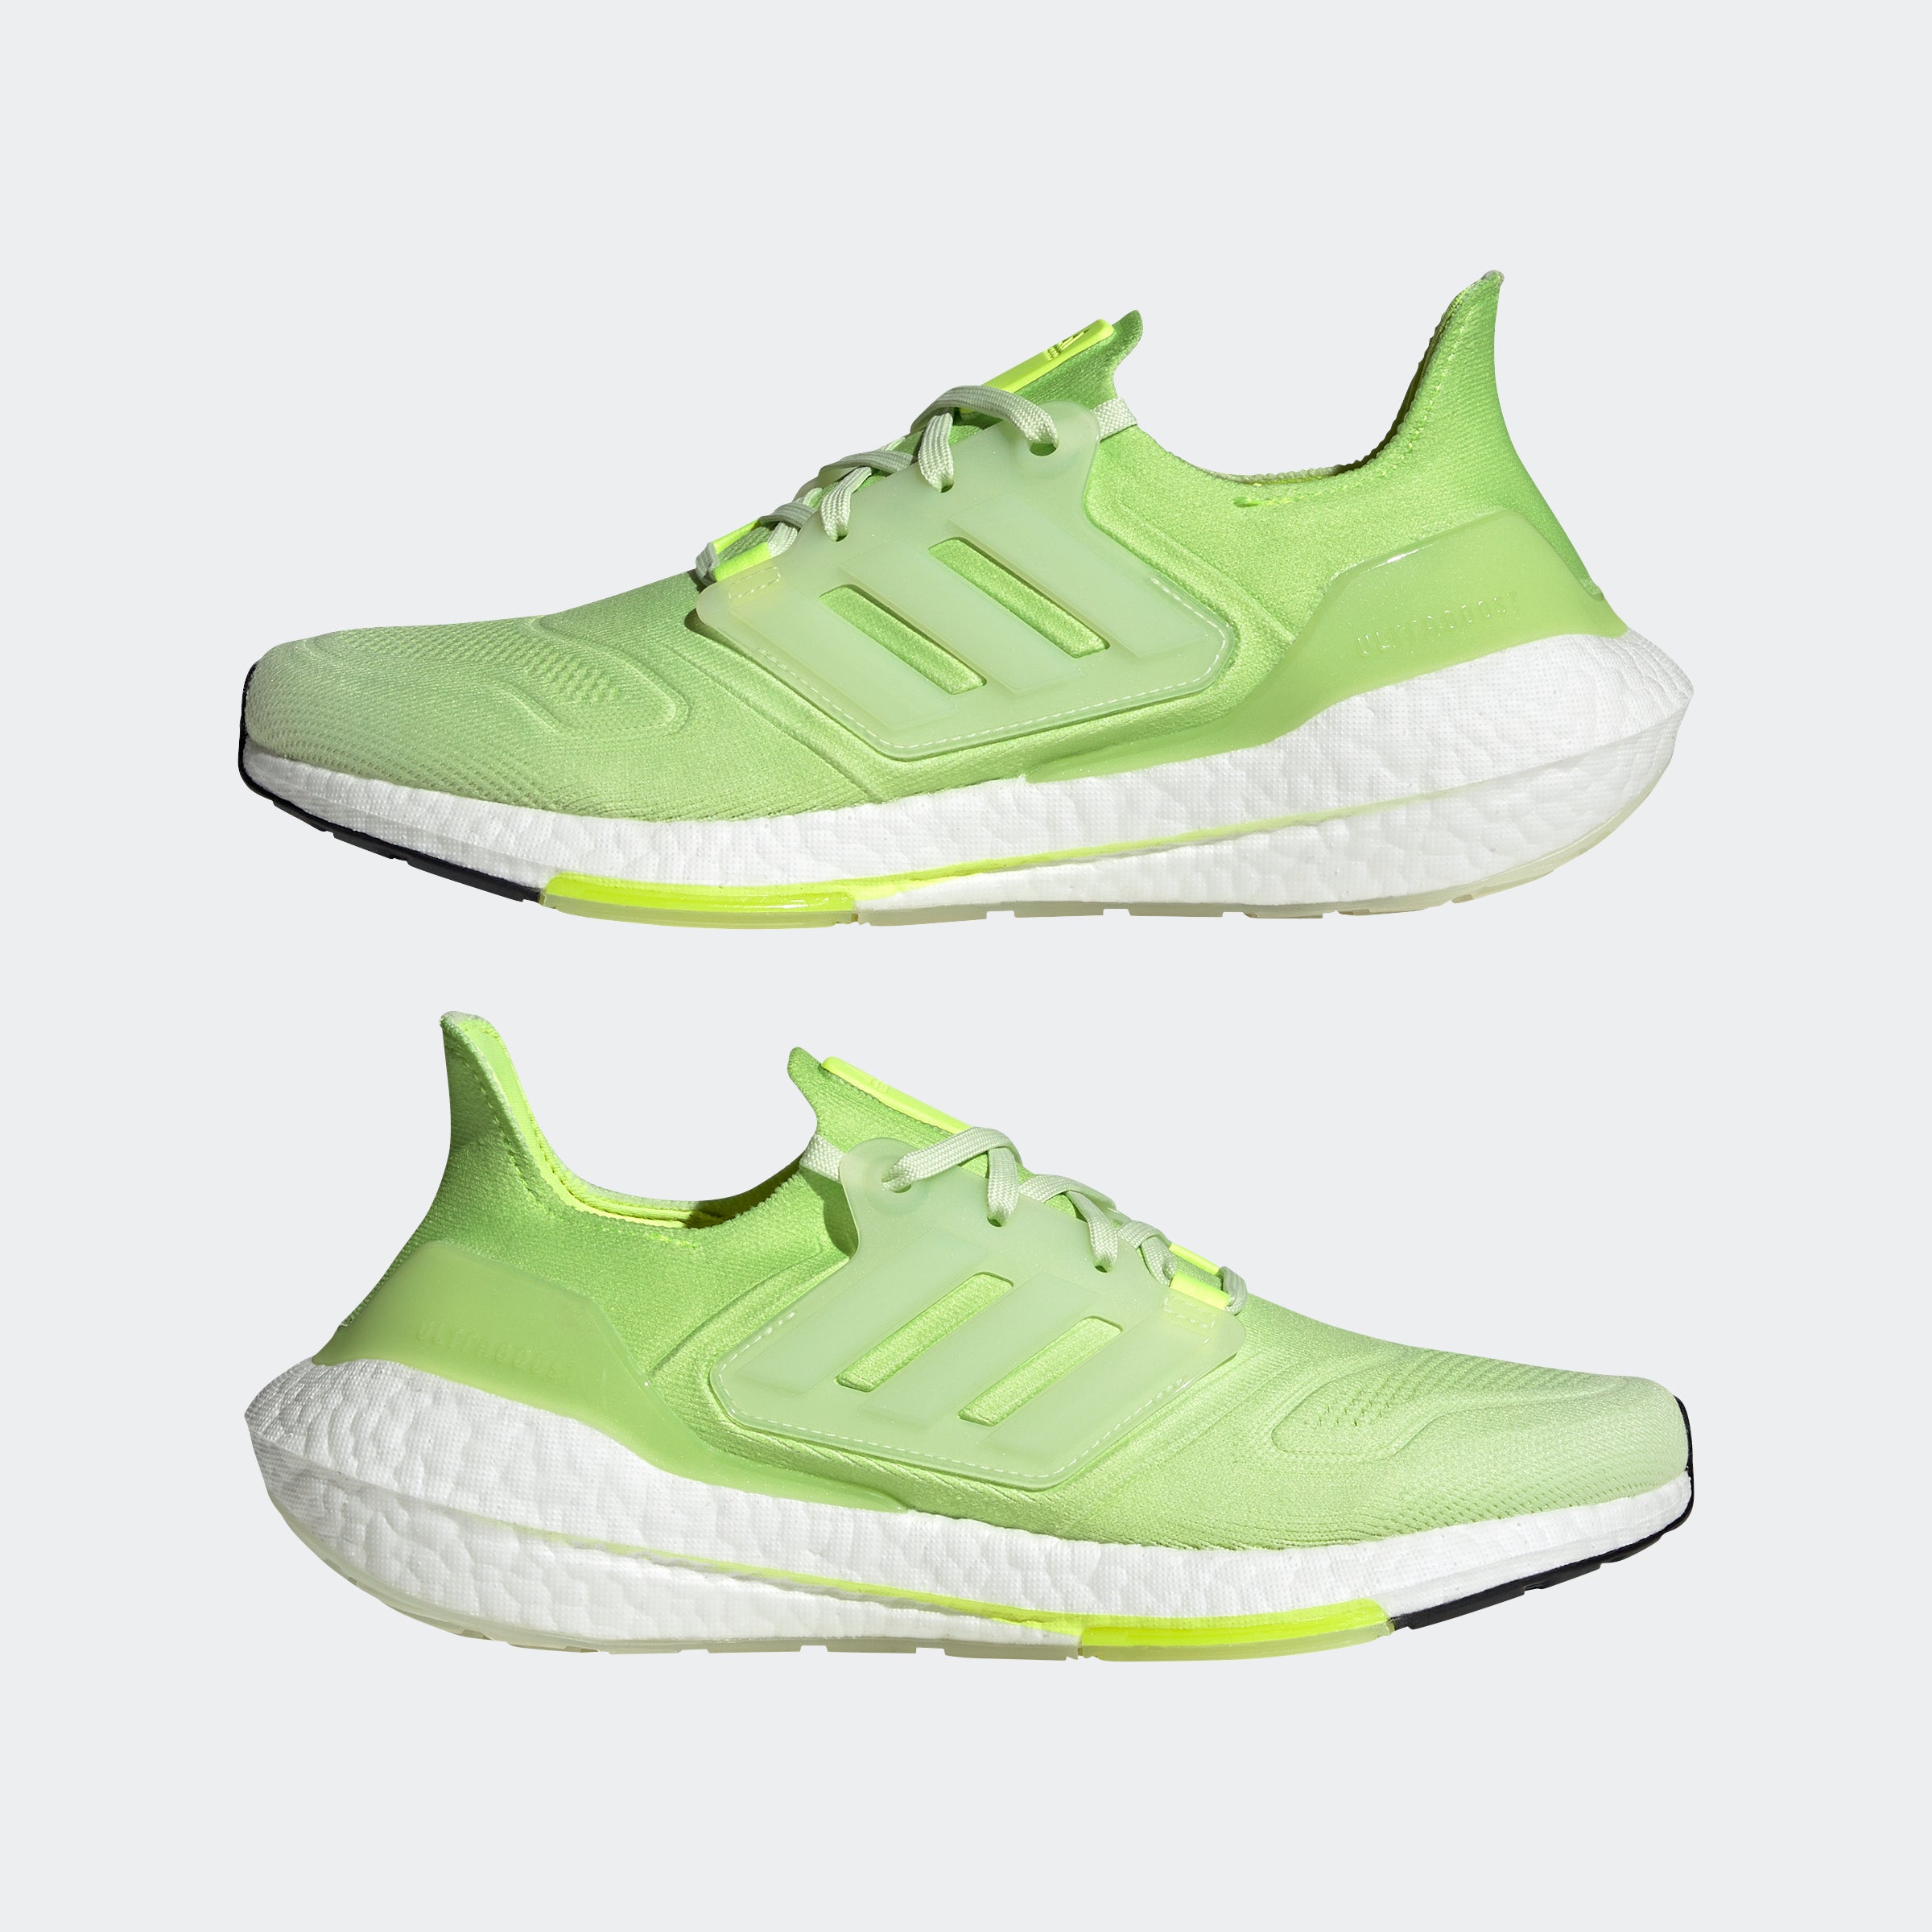 Adidas Neon Shoes - Buy Adidas Neon Shoes online in India